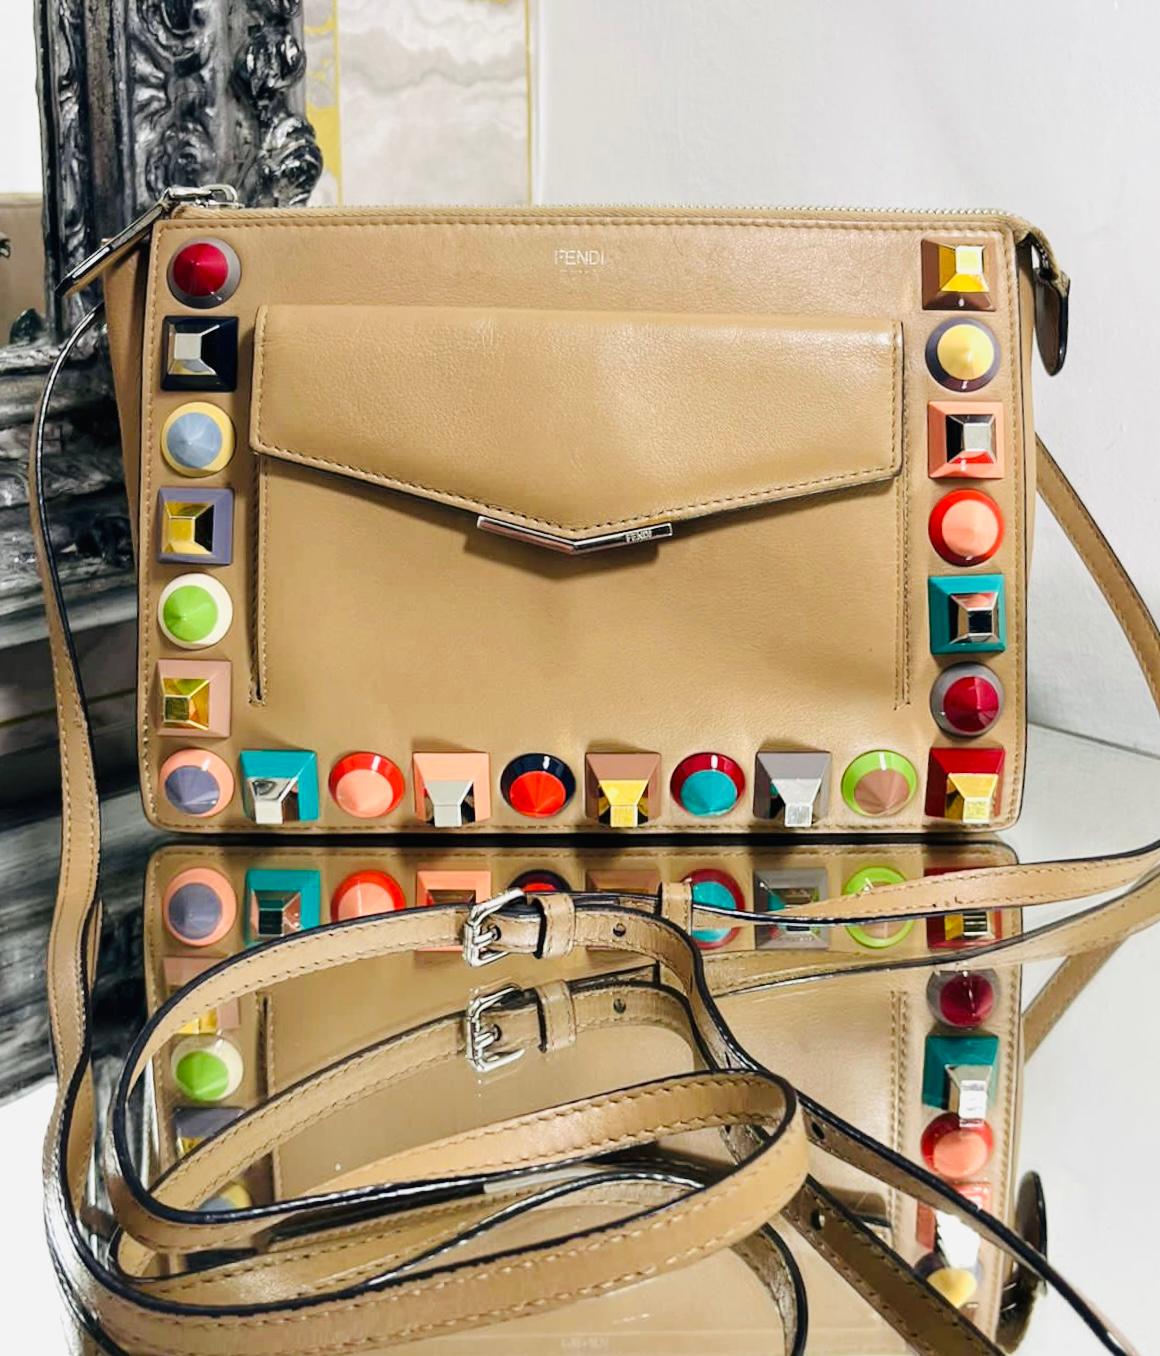 Fendi Rainbow Stud Leather Bag

Nude shoulder bag designed with multicoloured, oversized studs along the edges.

Featuring small, flap compartment to the front and zipped top.

Detailed with silver hardware with 'Fendi' engravement to the centre and